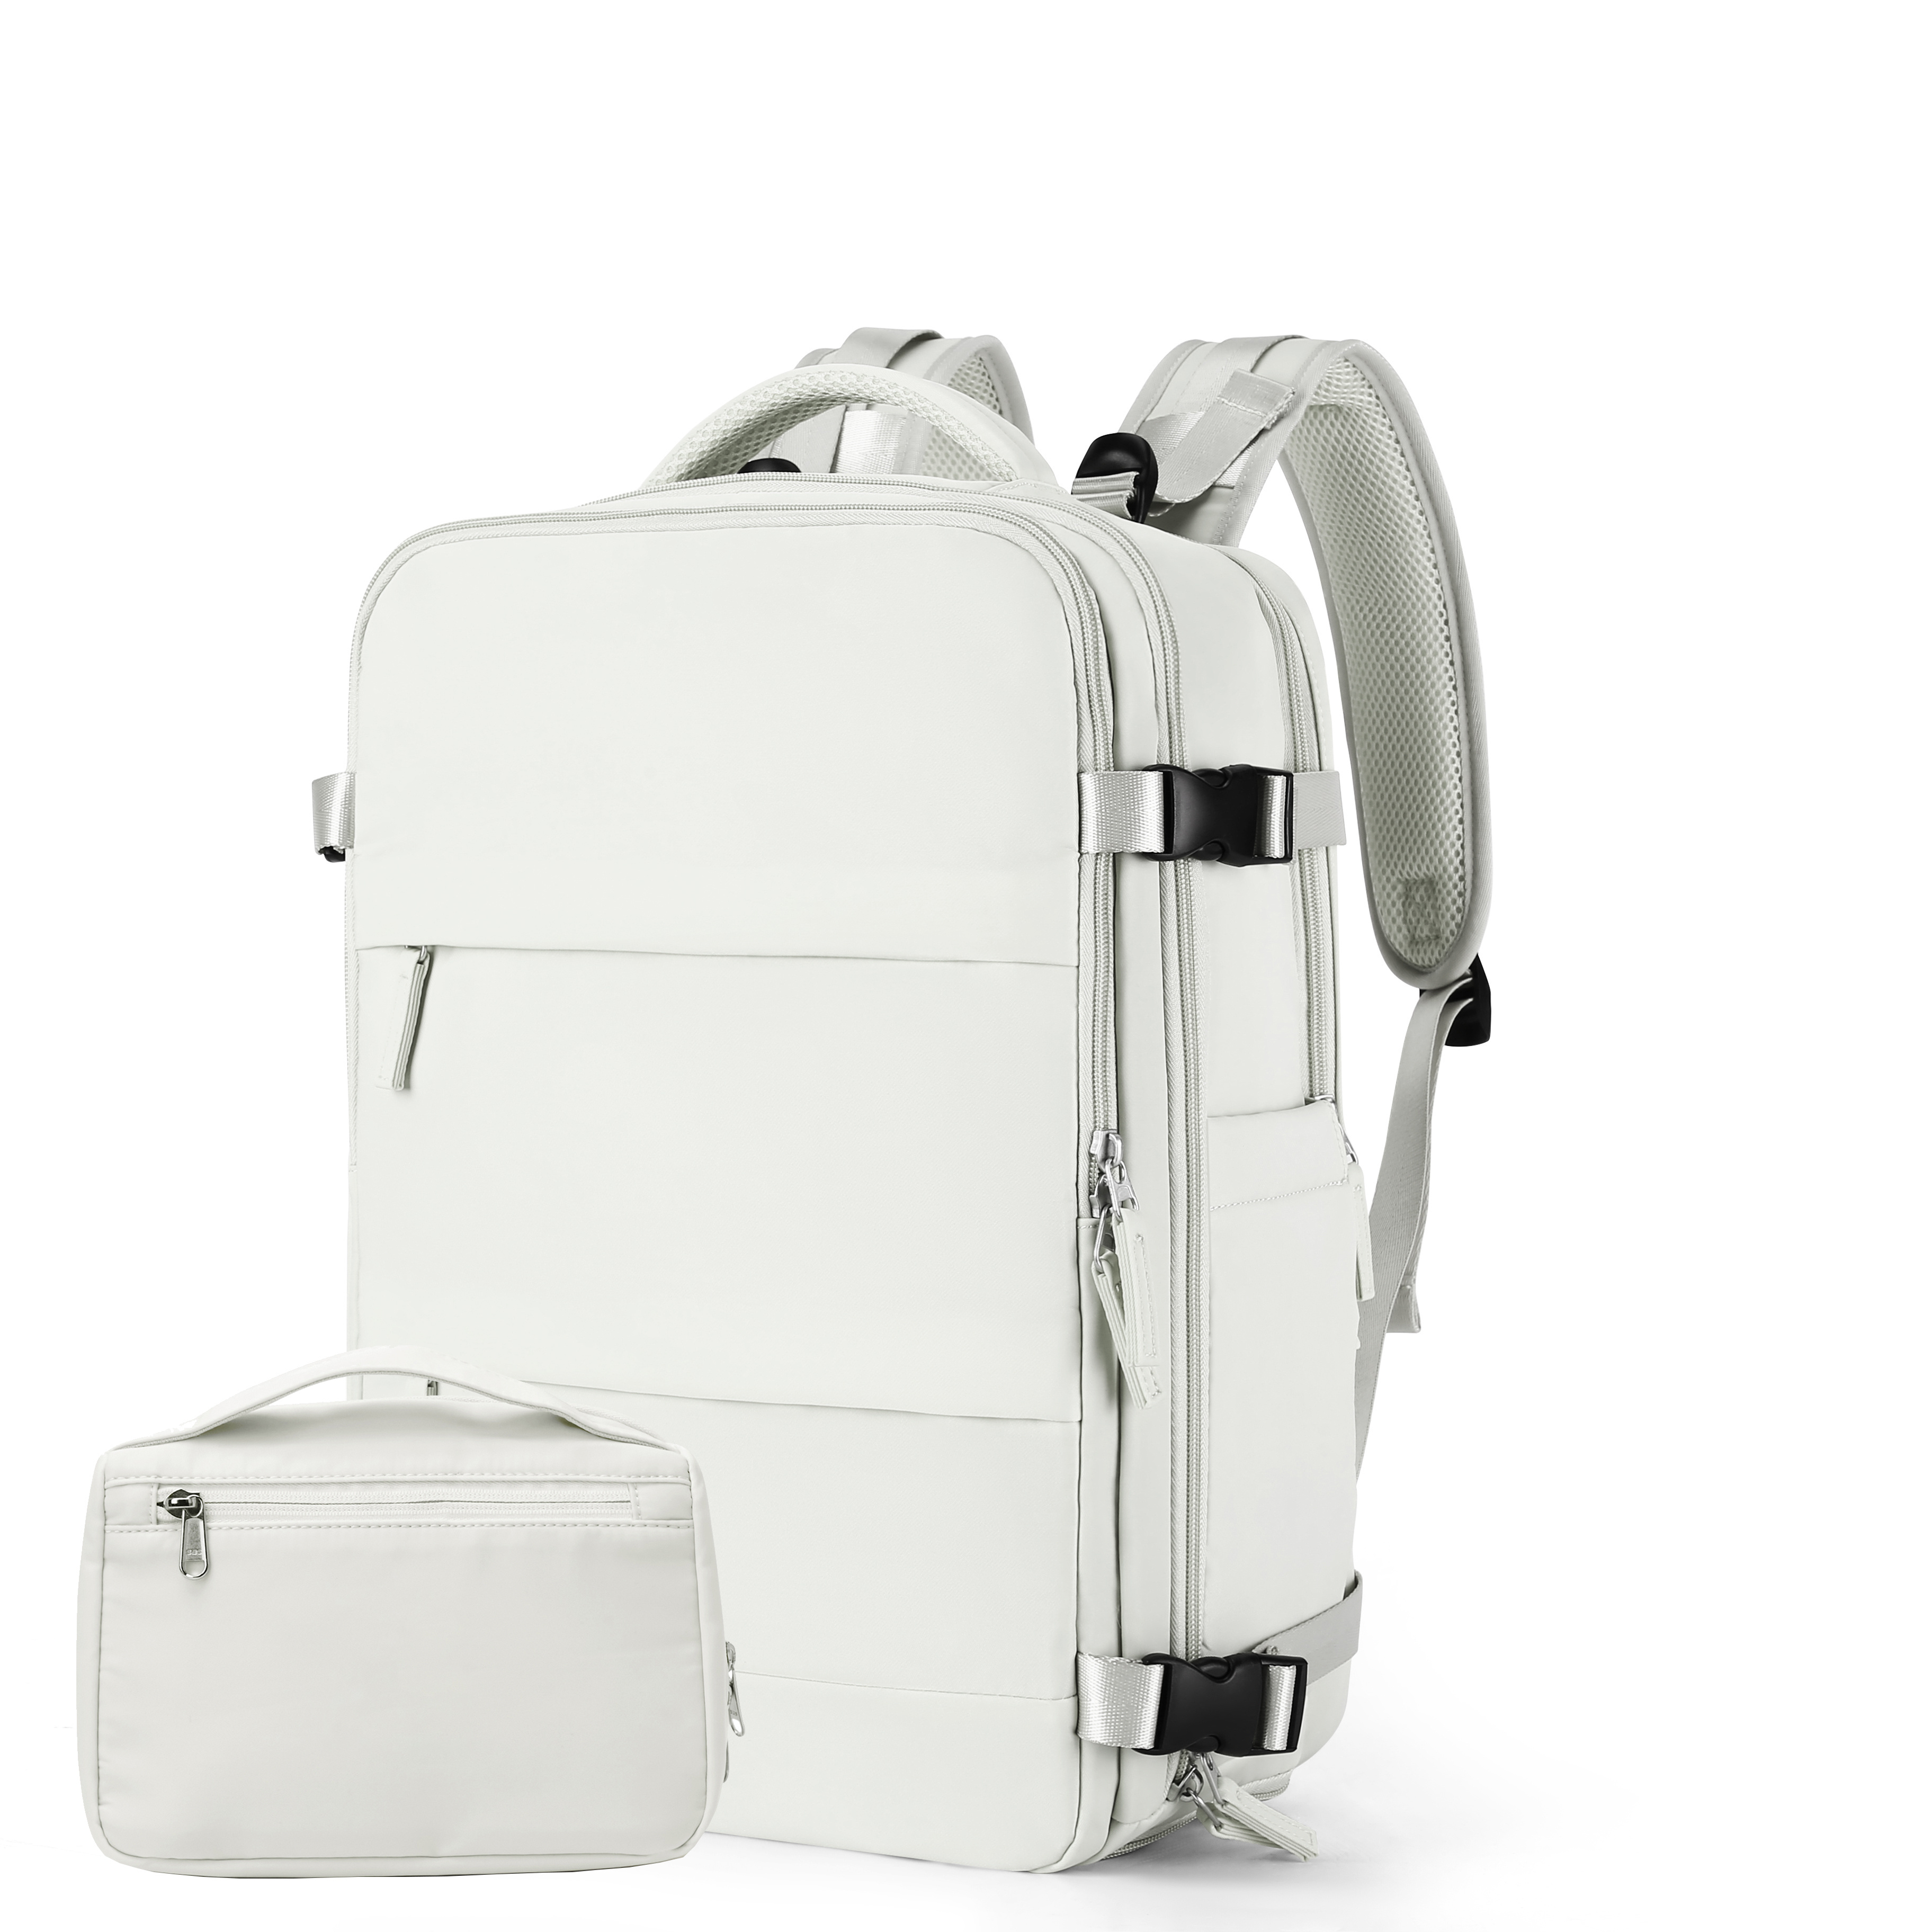 The PYTHO is an All-In-One Backpack for Gym, Work and Travel